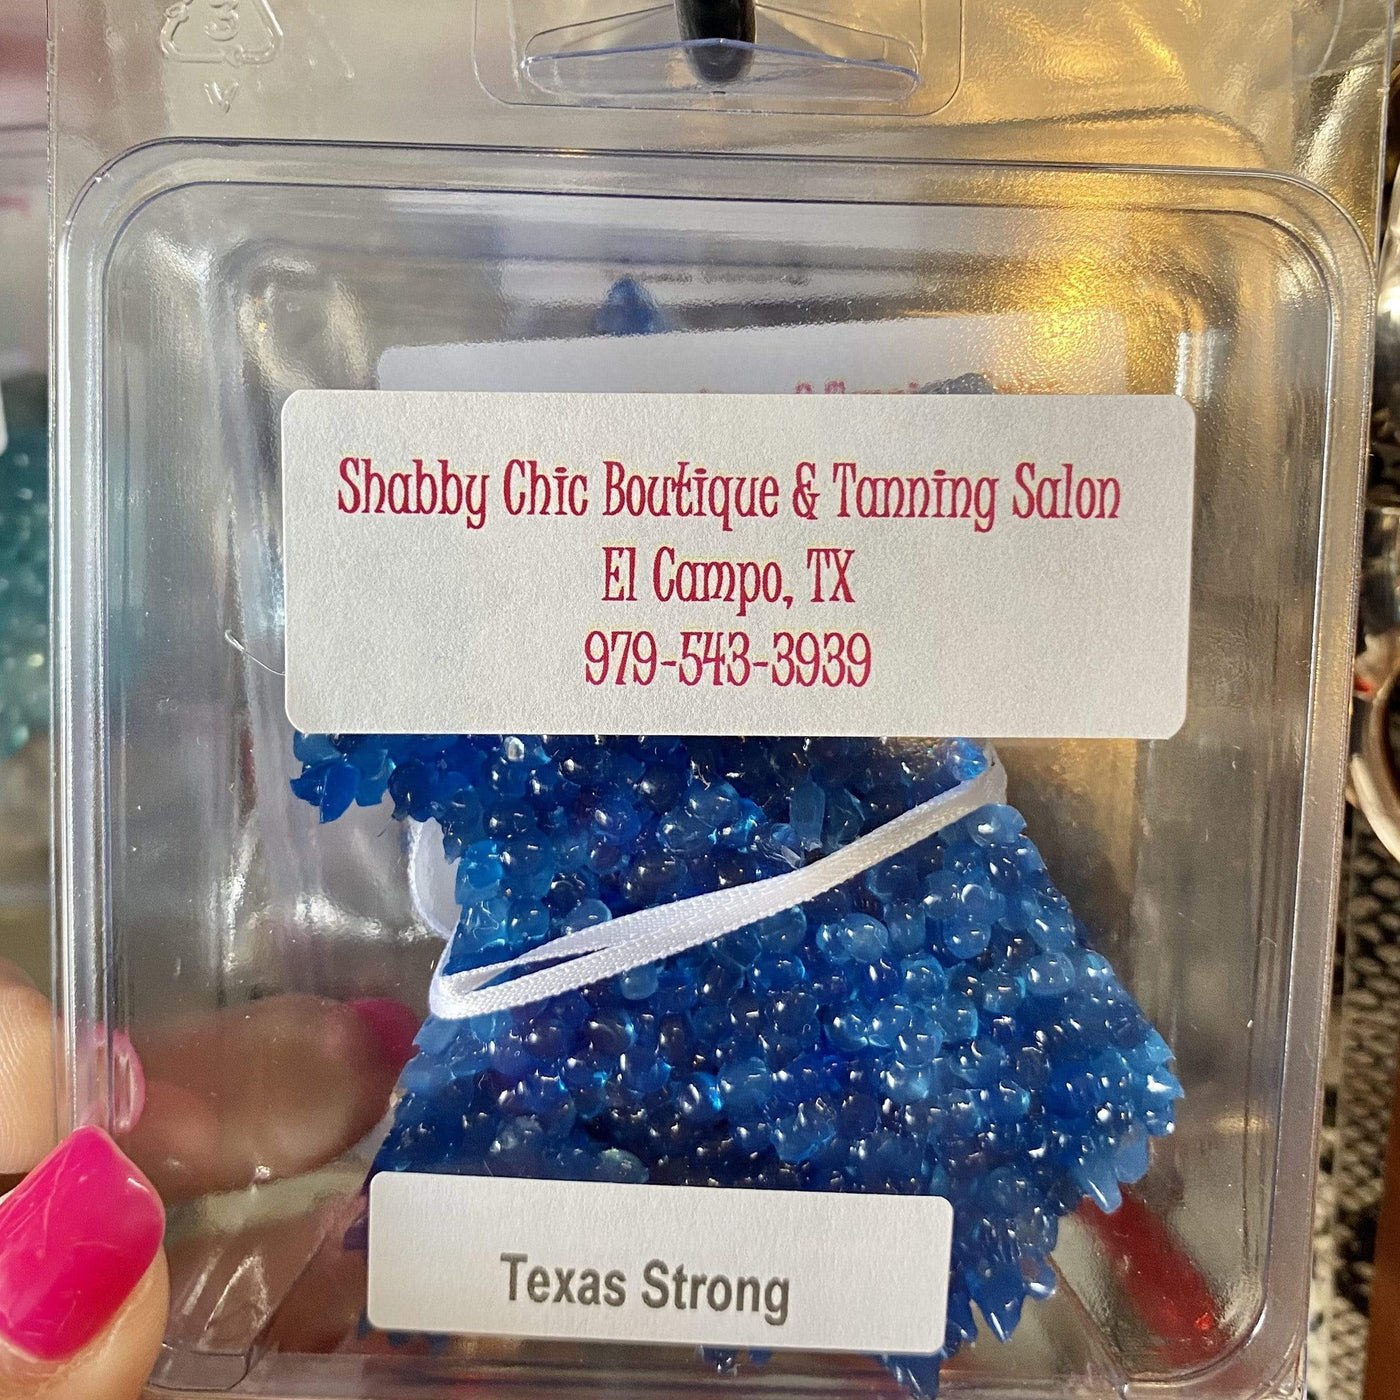 Texas Strong Car Aromies Shabby Chic Boutique and Tanning Salon